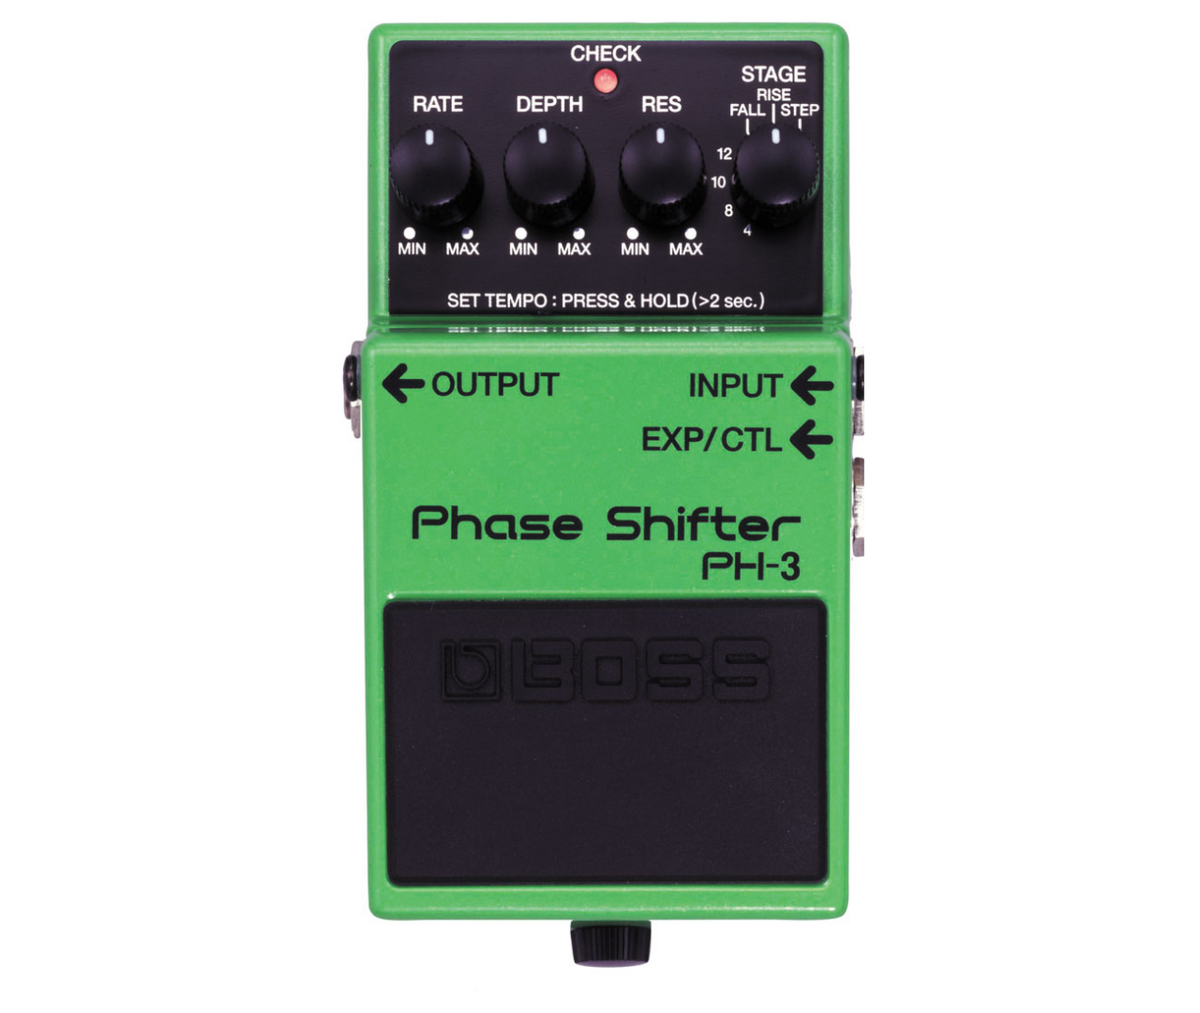 BOSS PH-3 Phase Shifter Best Guitar Effects Pedal Vintage and Modern Phasing Realtime Rate, Filter and Tempo Control